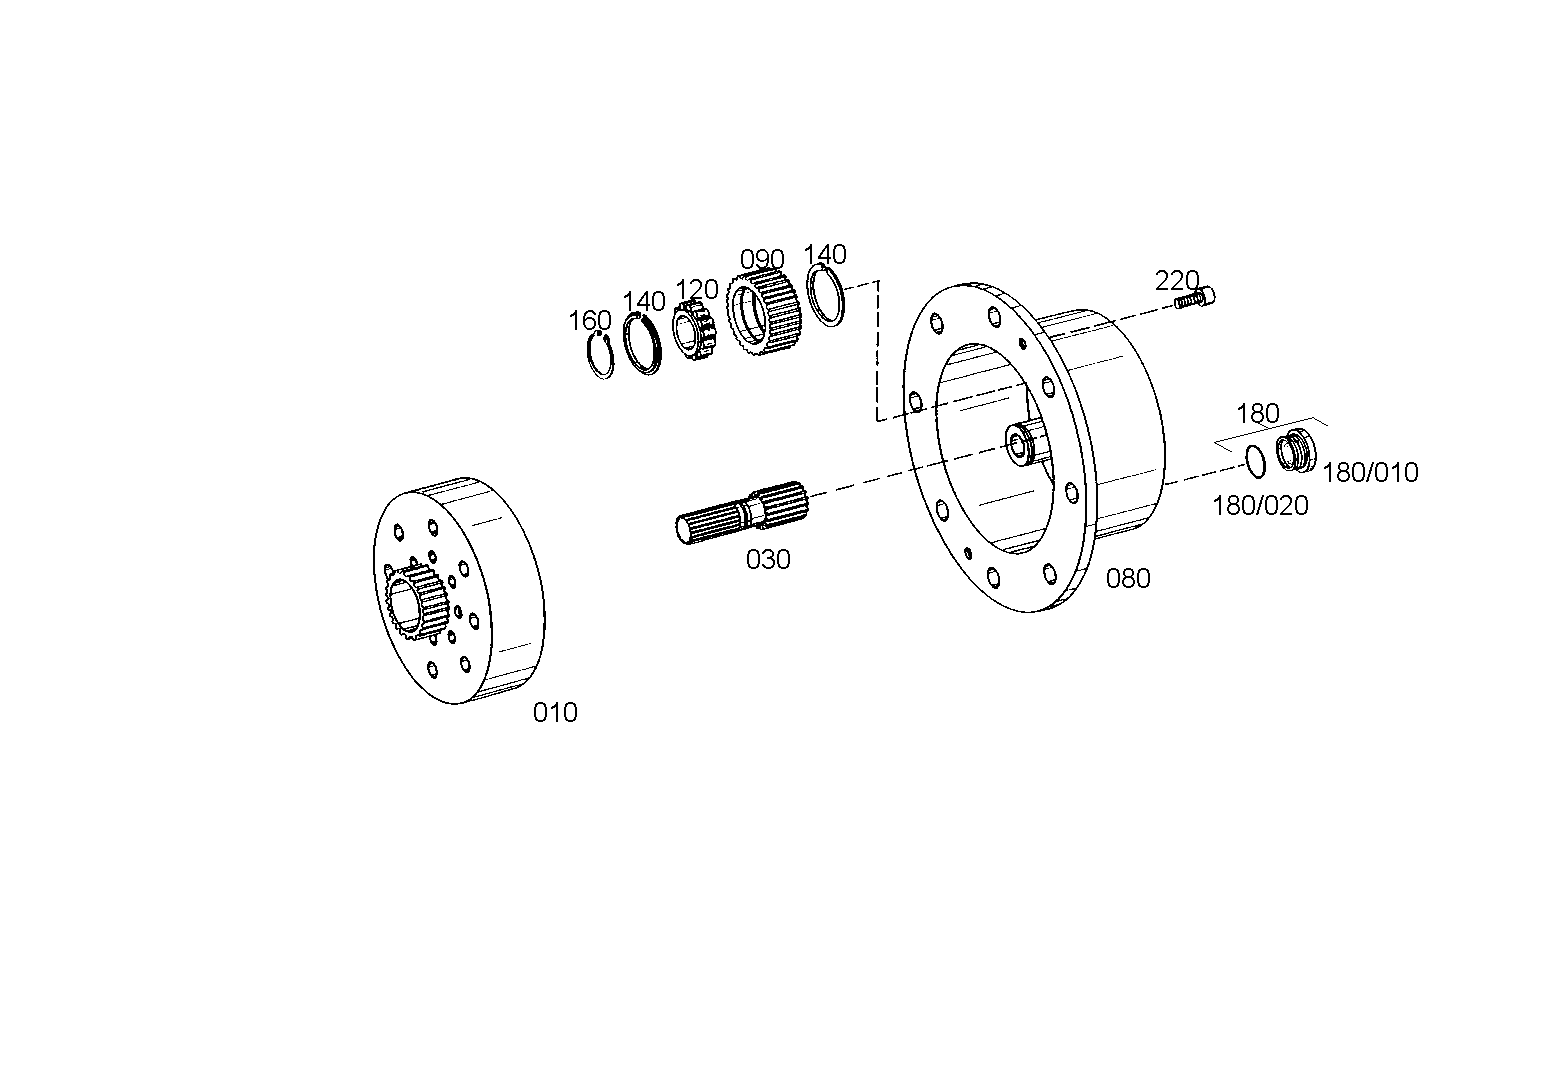 drawing for AGCO F117301020080 - PLANET GEAR (figure 3)